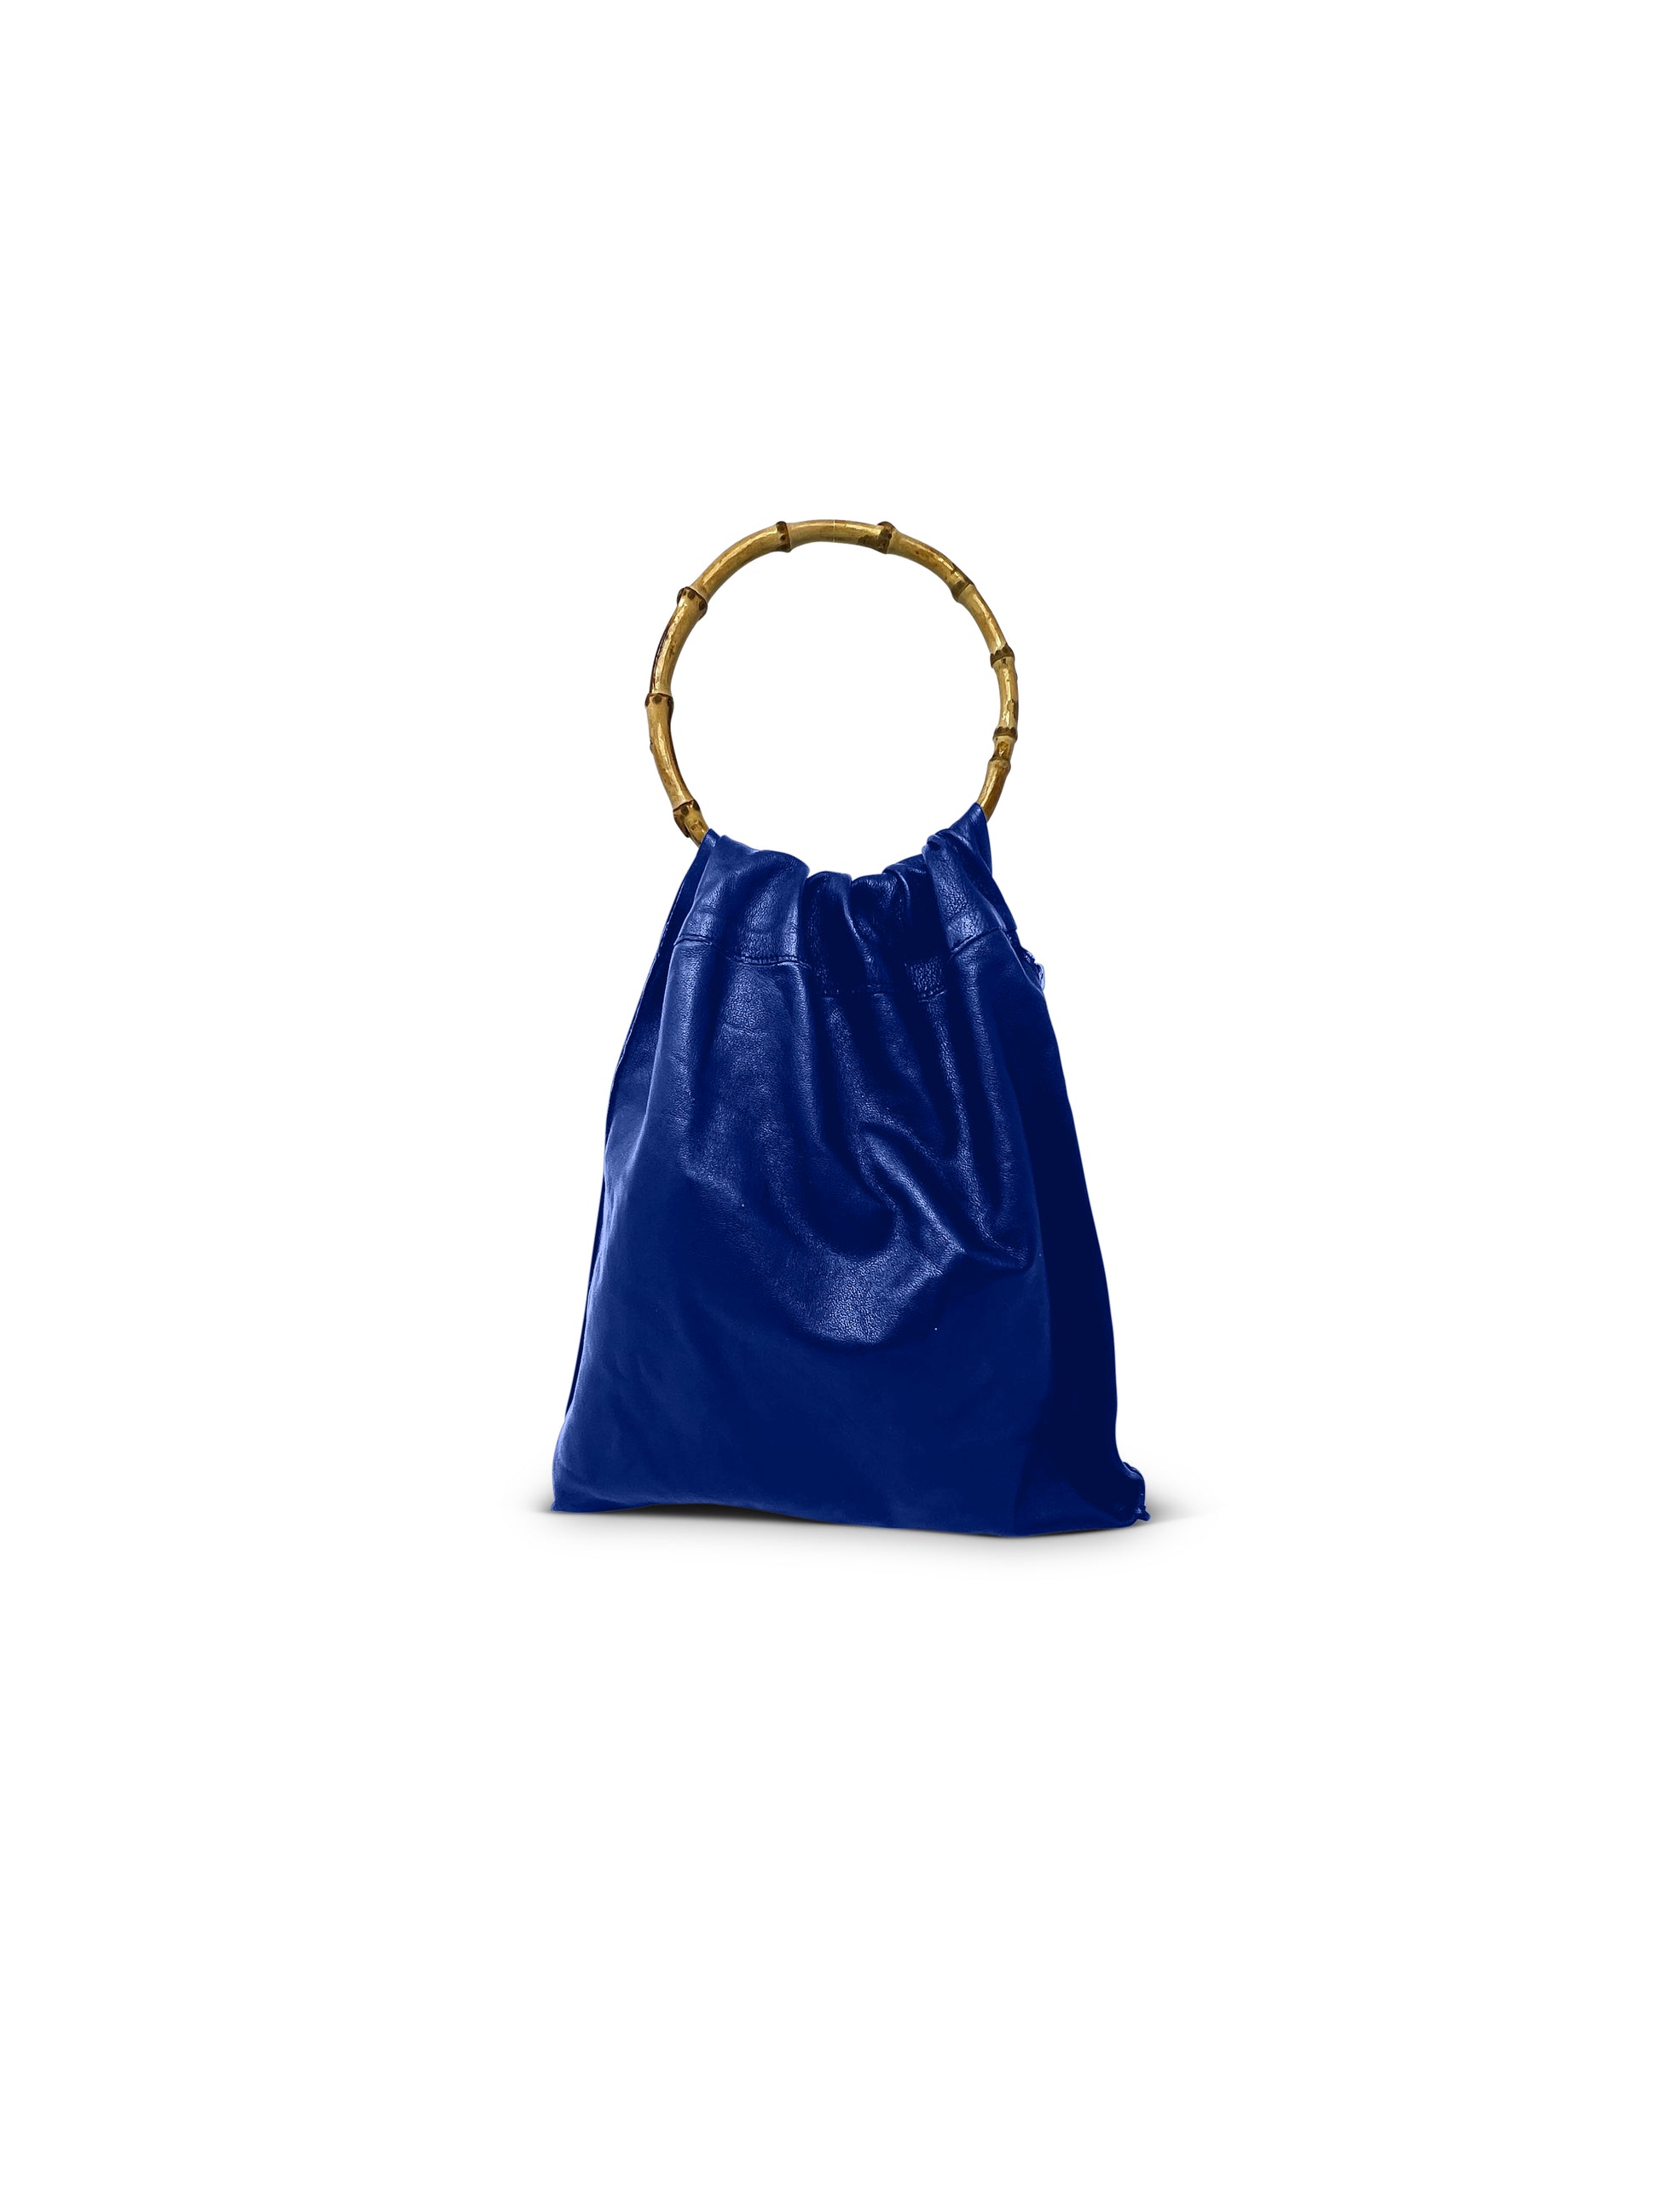 Blue leather bag with round natural bamboo handle.